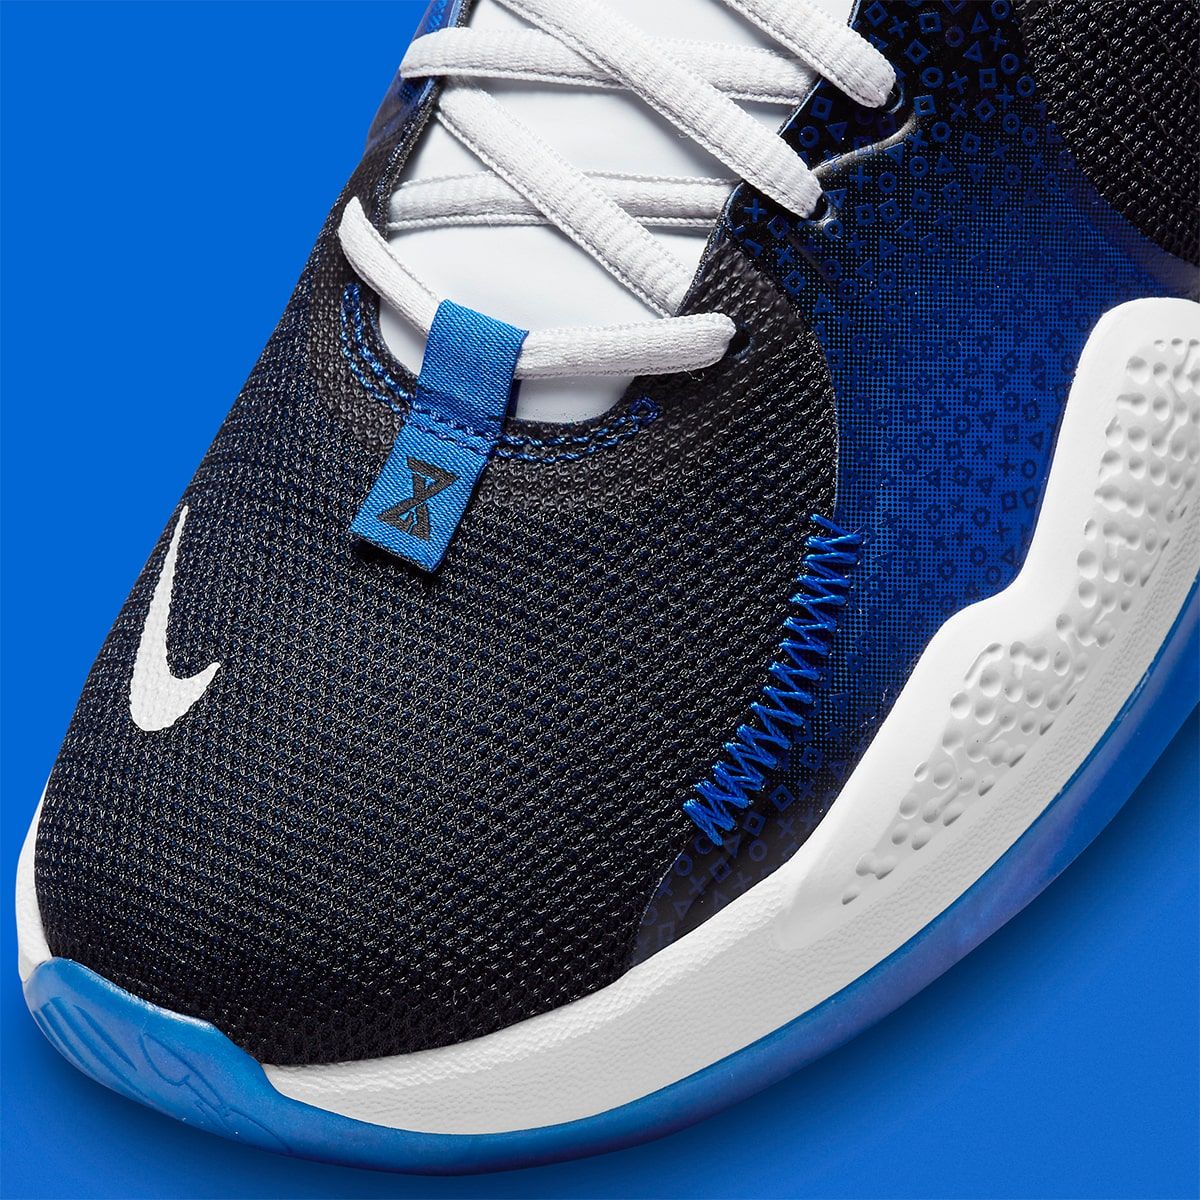 Nike PG 5 “PlayStation” Revealed in Blue | House of Heat°